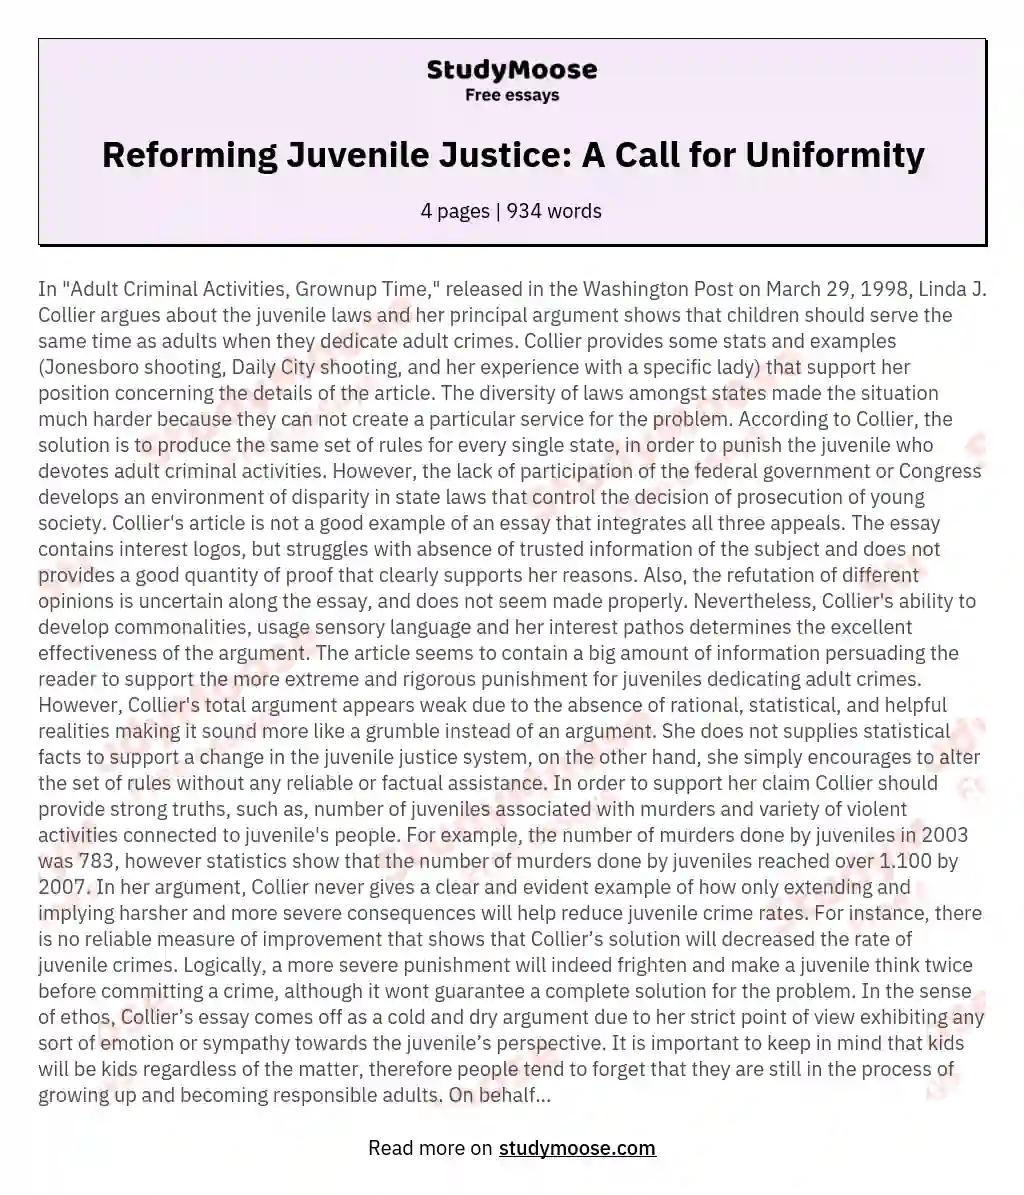 Reforming Juvenile Justice: A Call for Uniformity